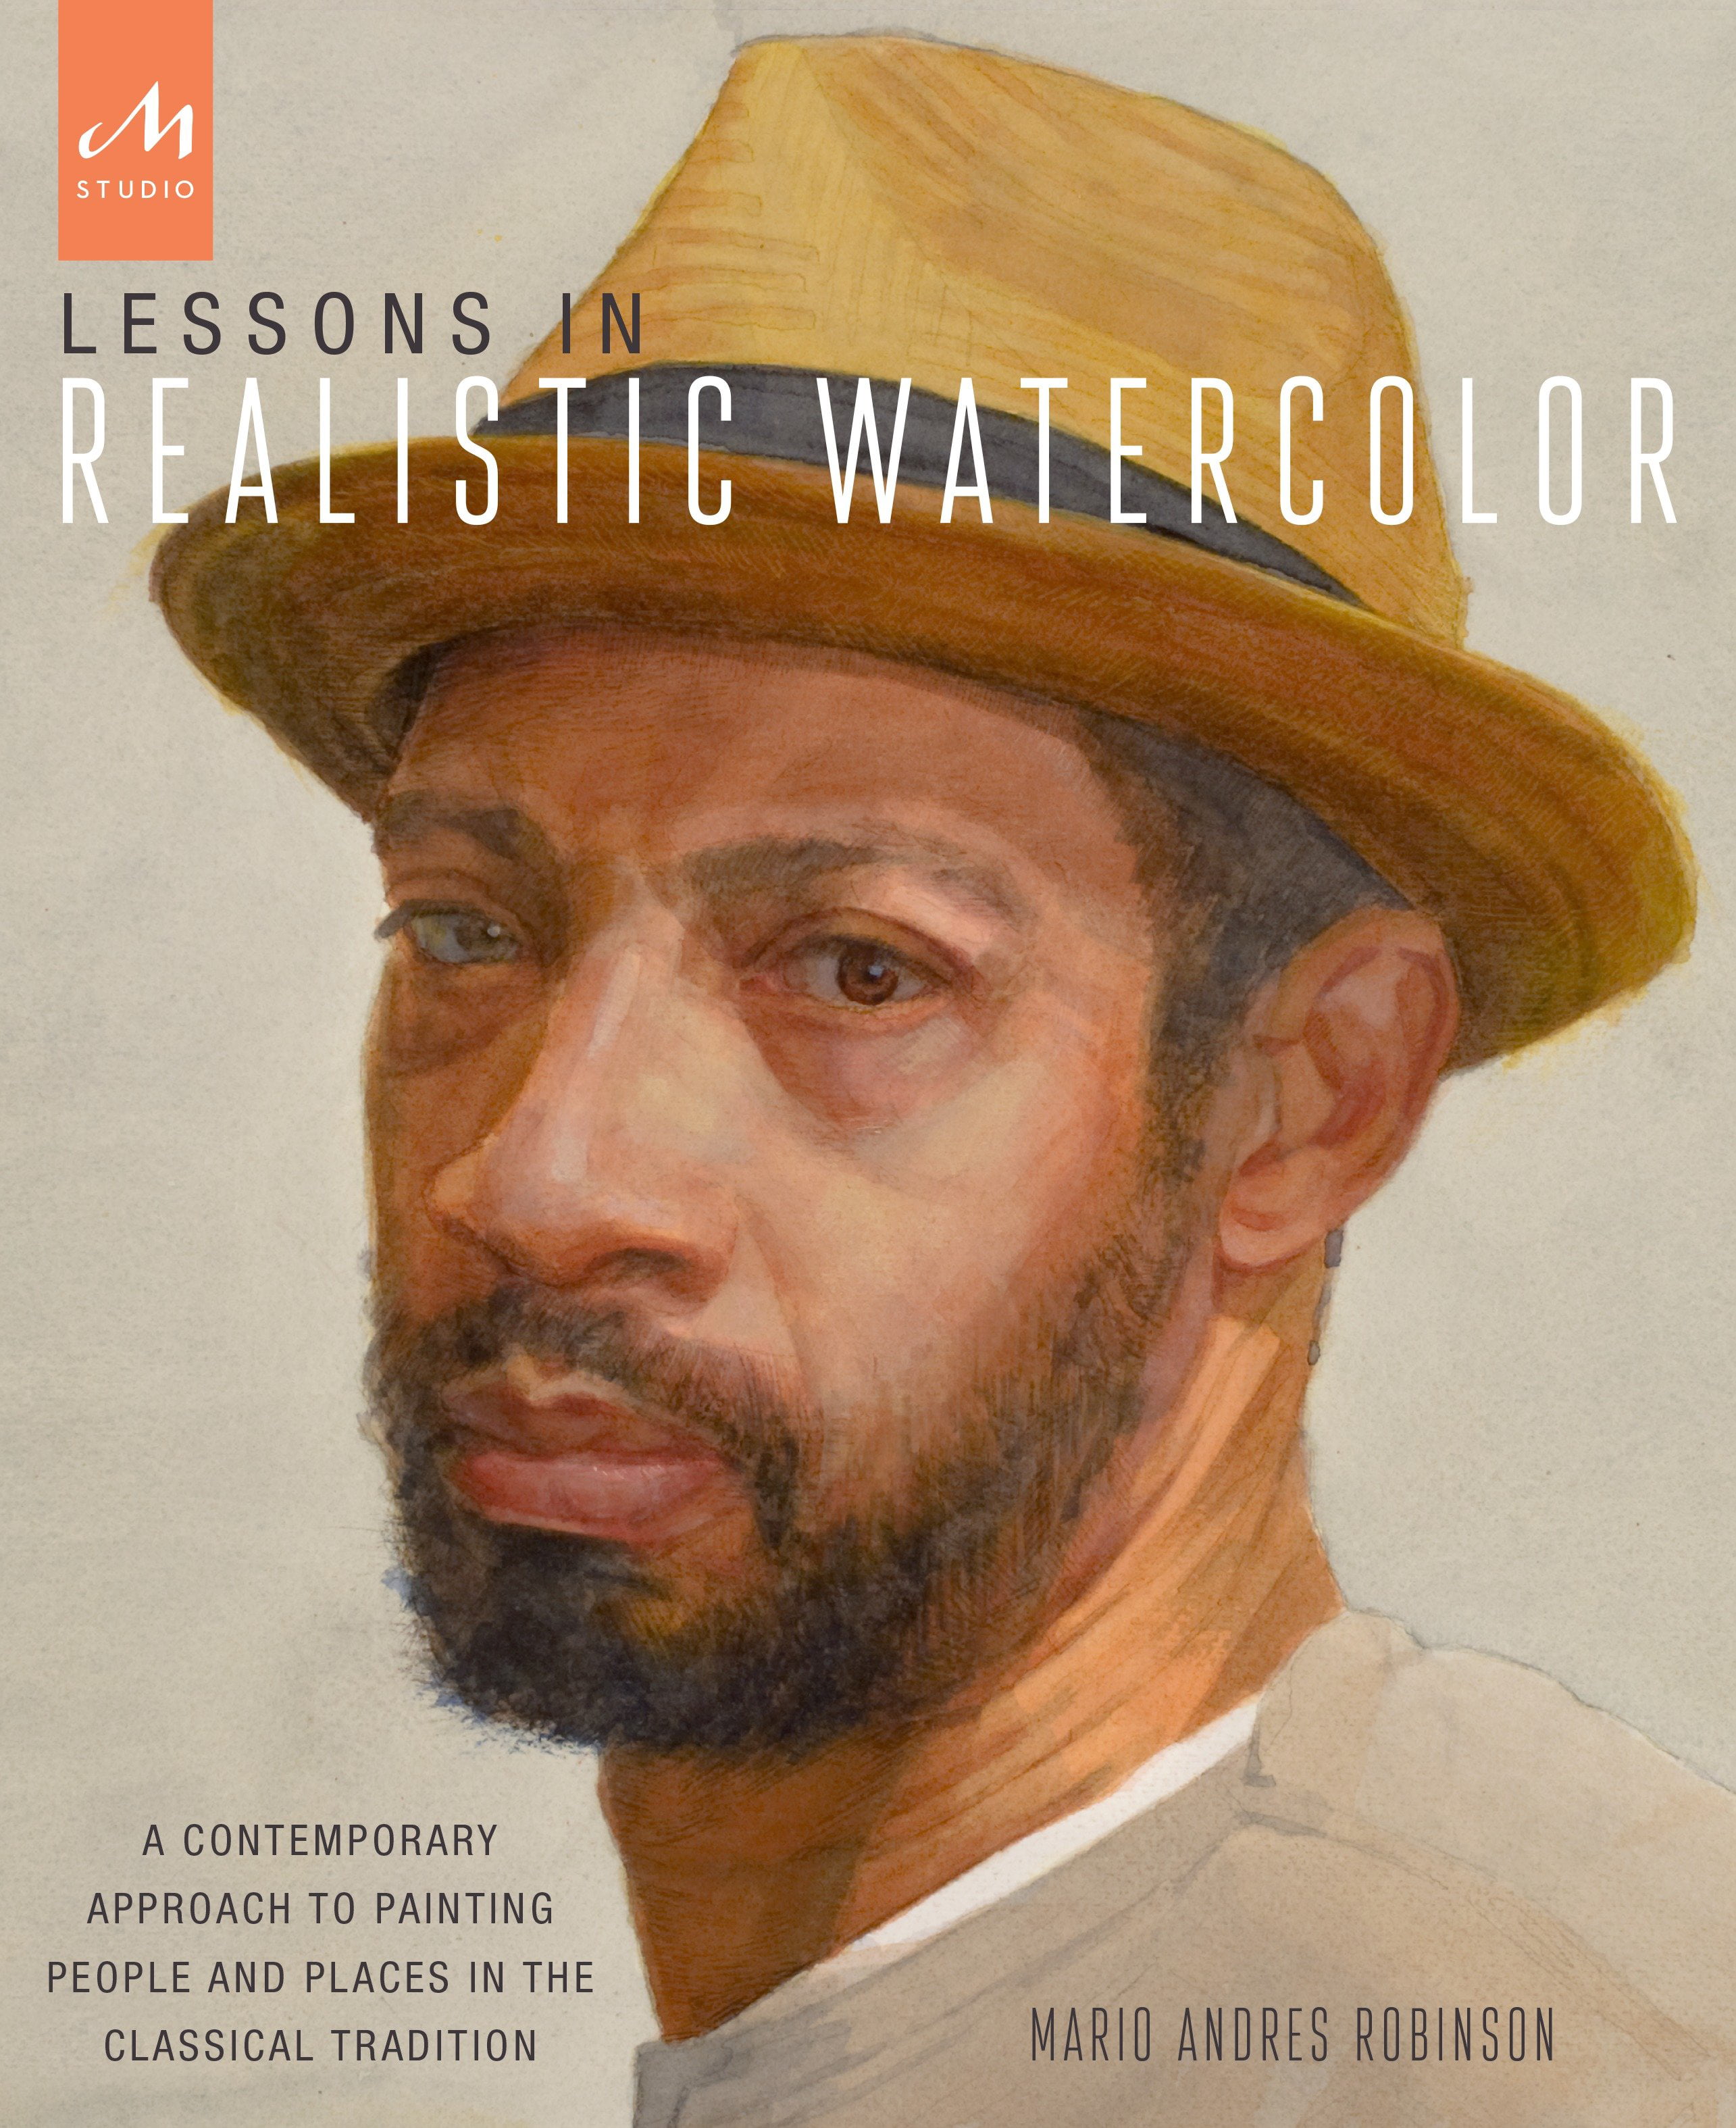 Lessons-in-Realistic-Watercolor-A-Contemporary-Approach-to-Painting-People-and-Places-in-the-Classical-Tradition